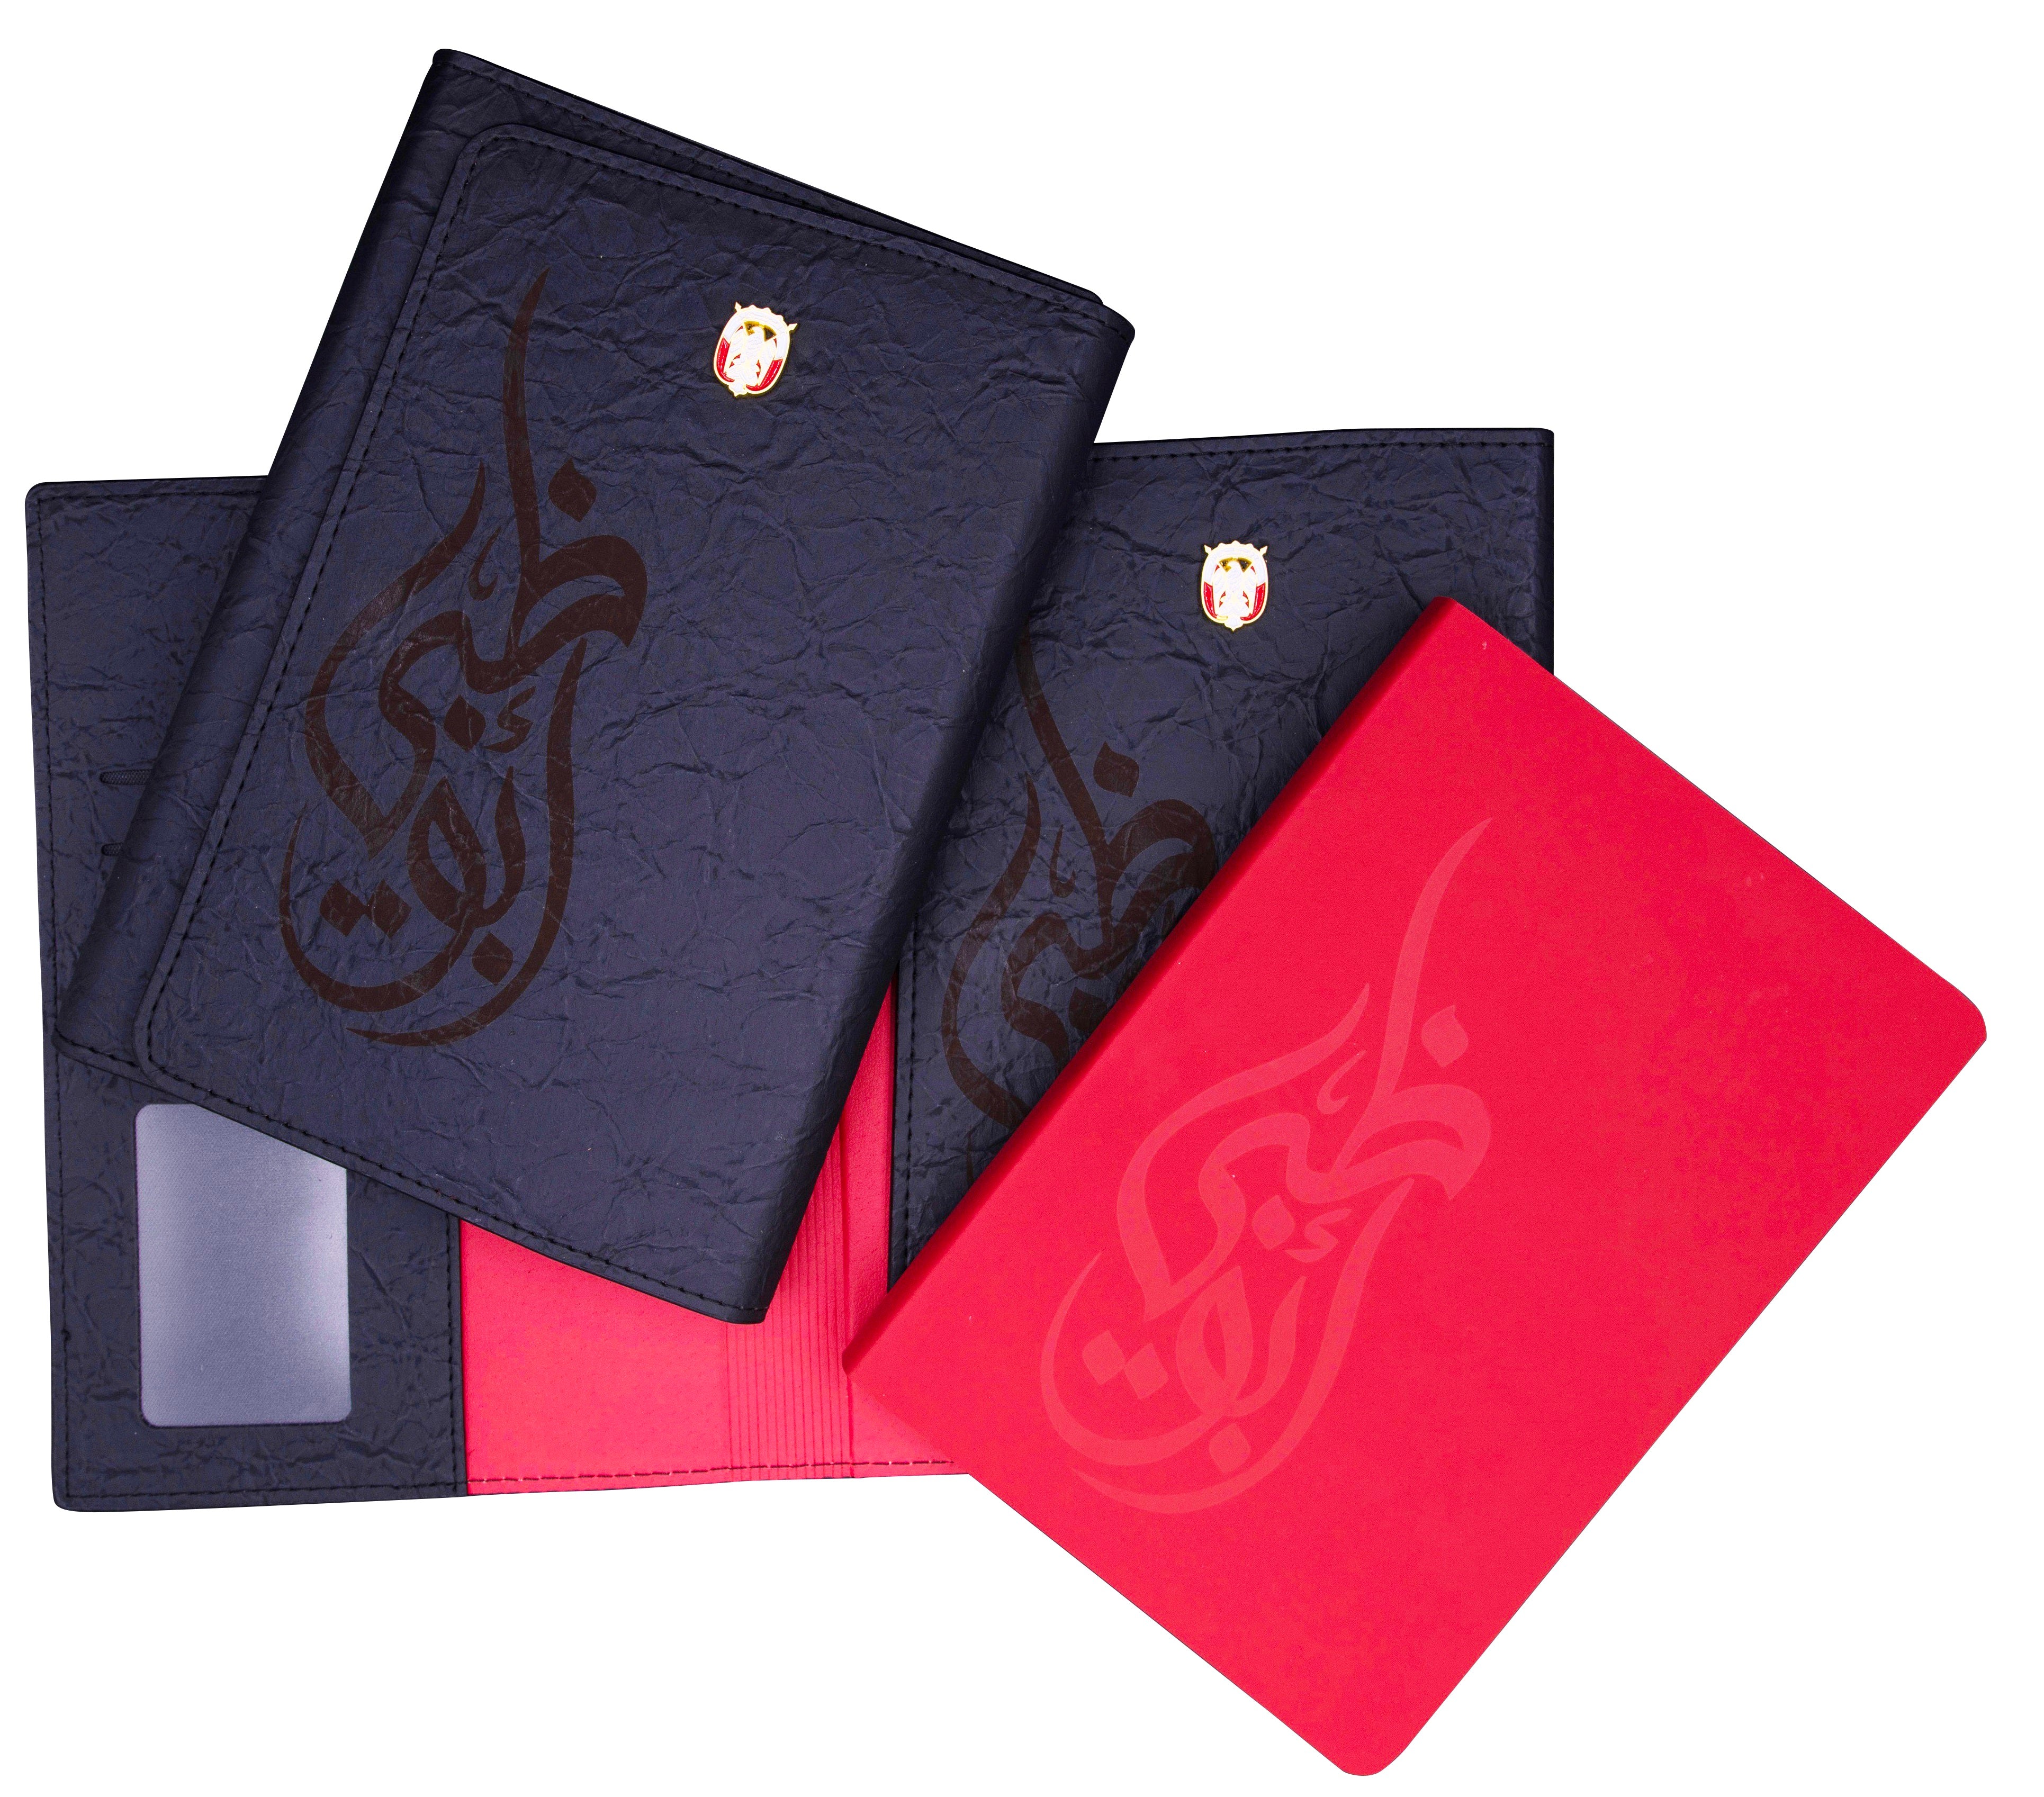 Rovatti AD Notebook Black | gifts for her or him | gift ideas dubai